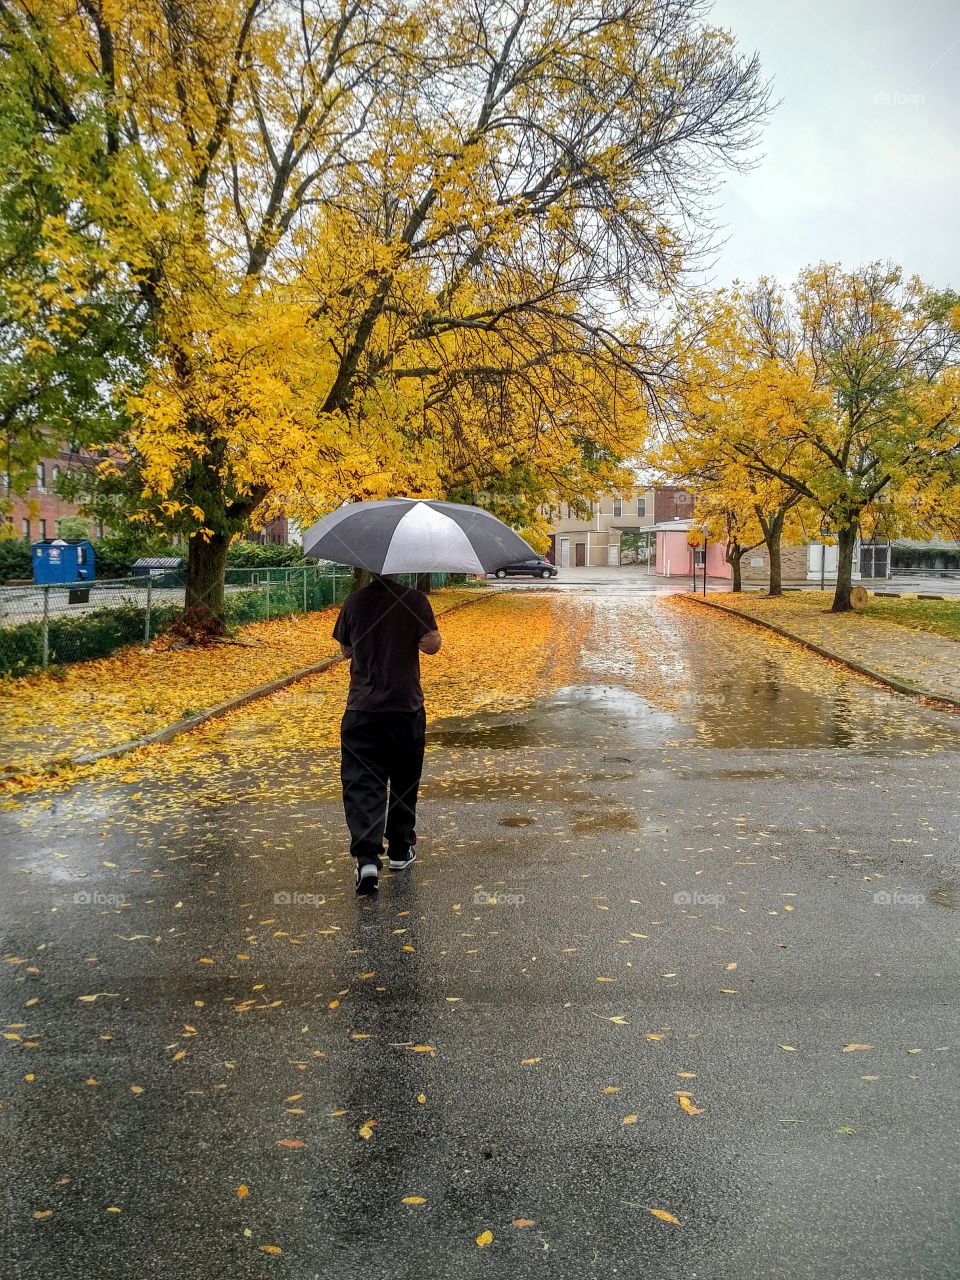 Rear view of person with umbrella